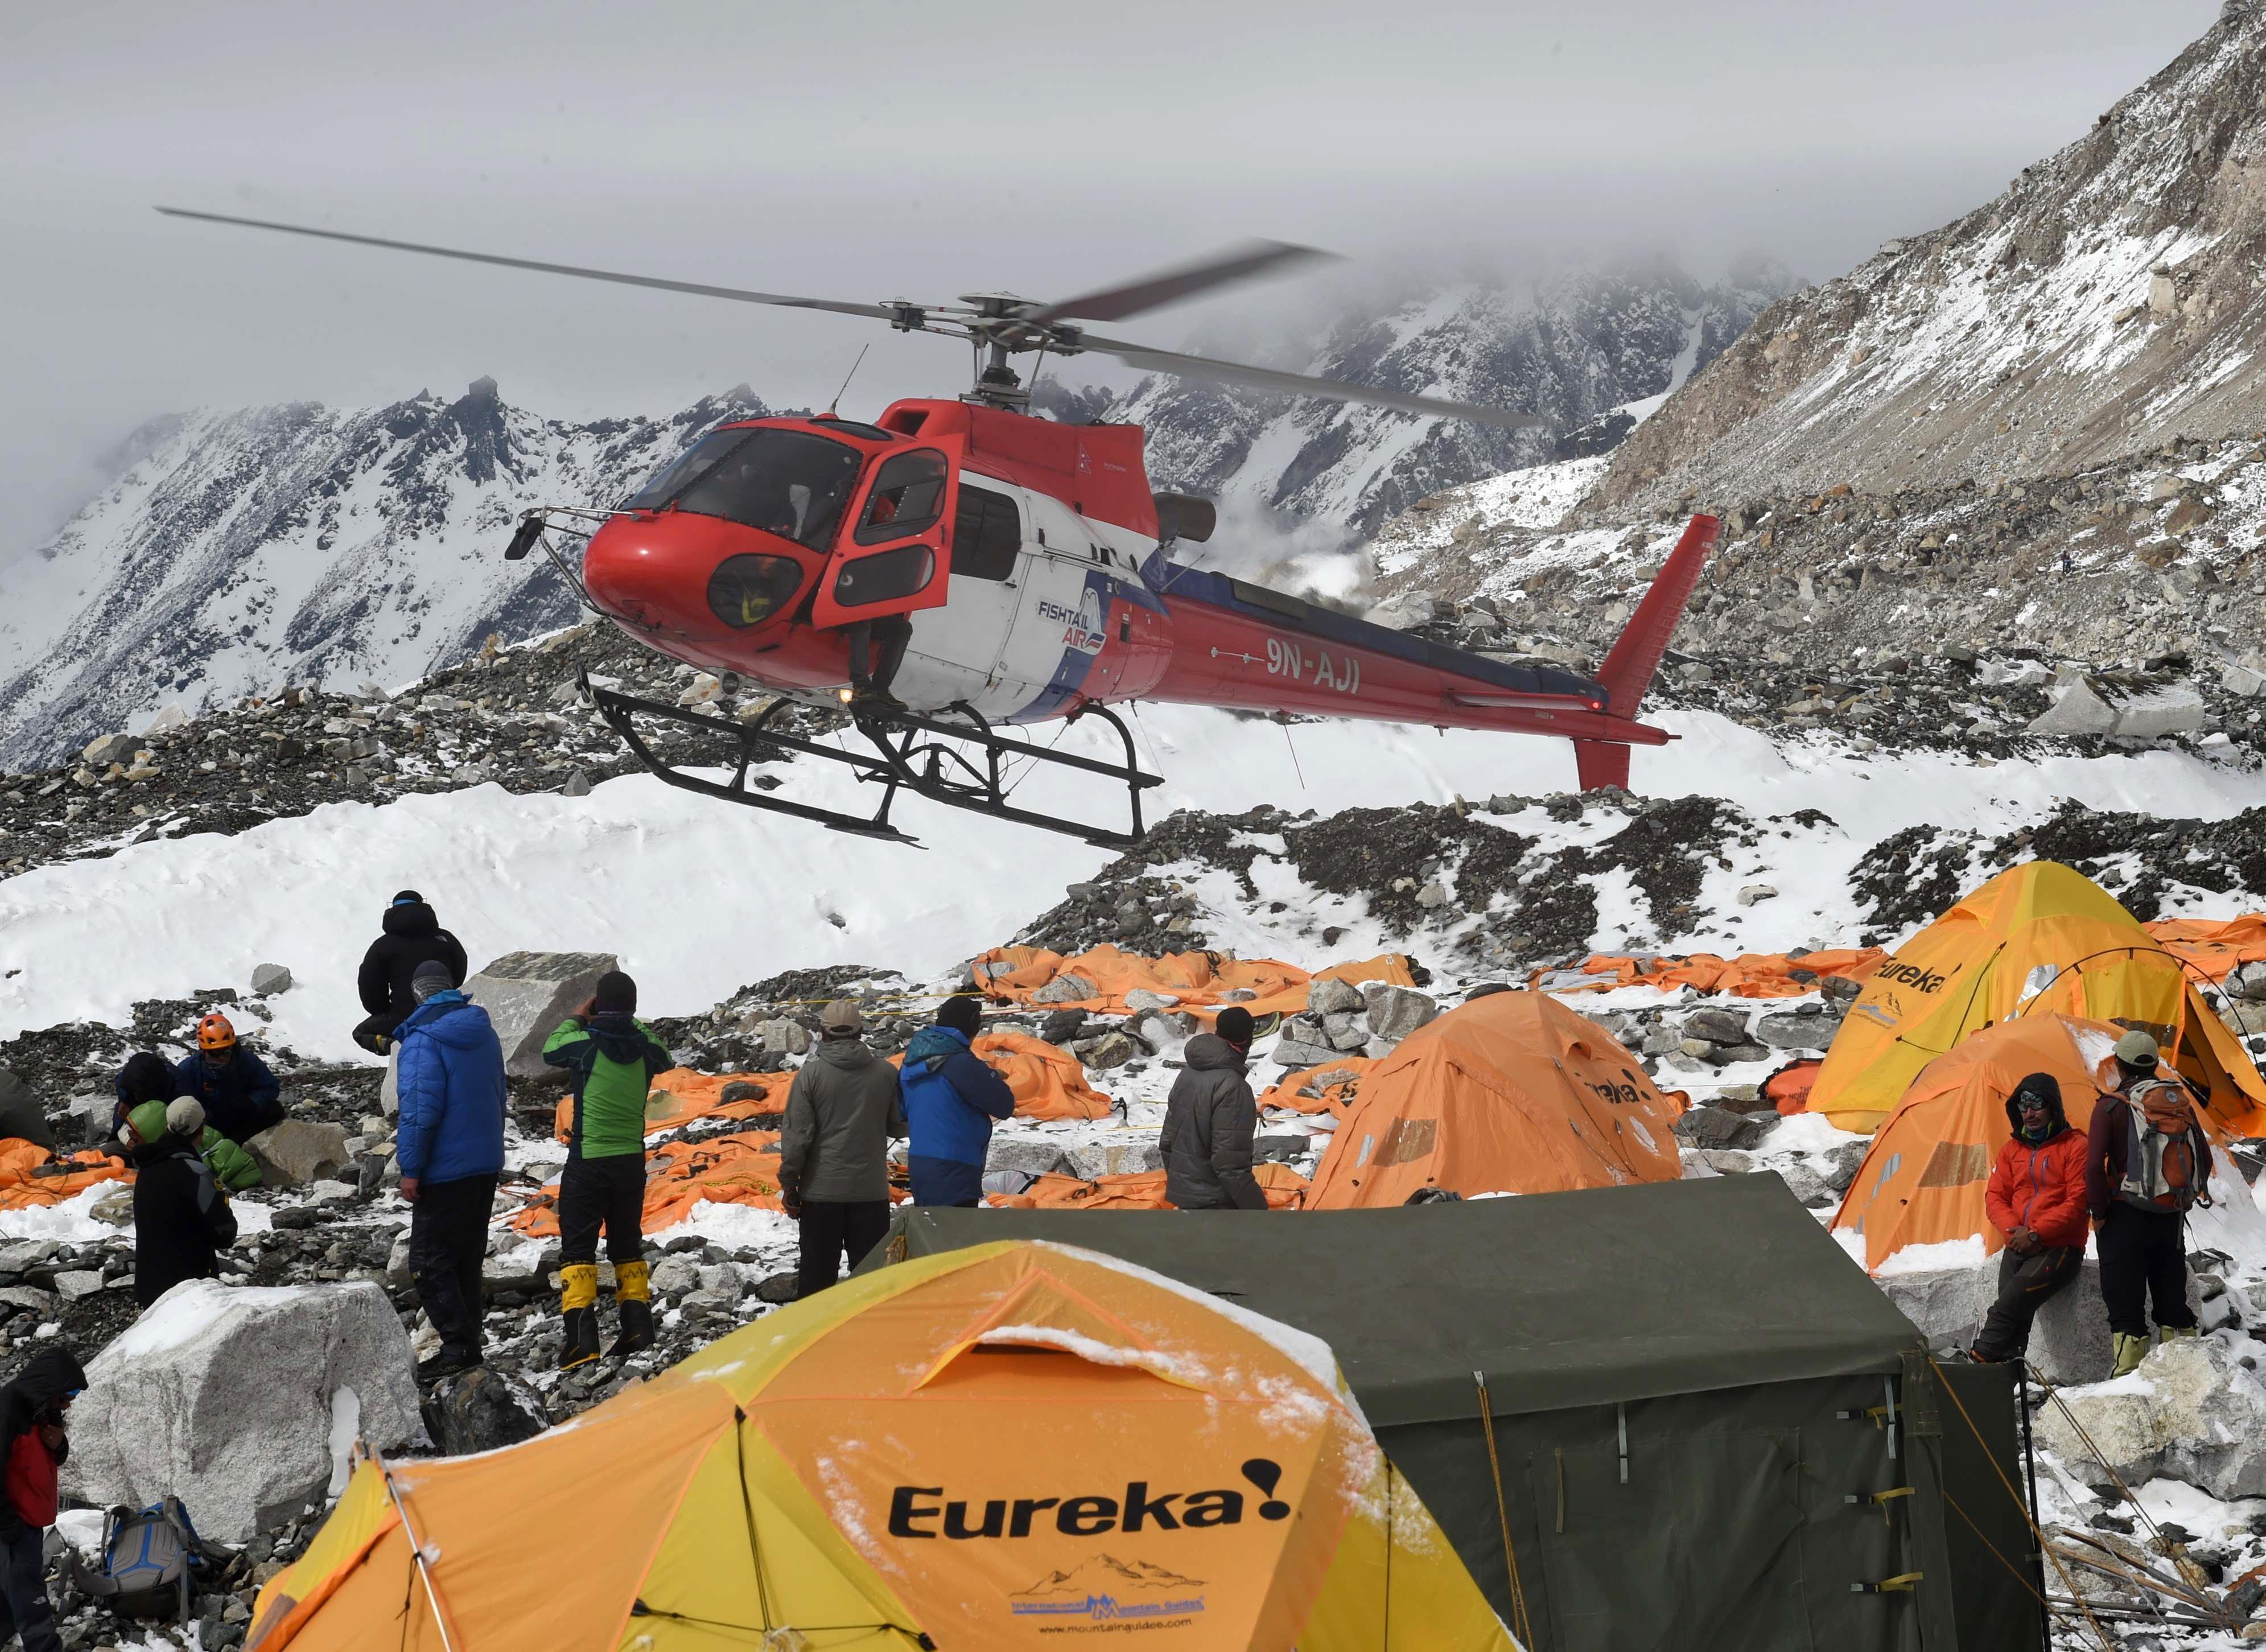 A rescue helicopter prepares to land and airlift the injured from Everest Base Camp on April 26, 2015, a day after an avalanche triggered by an earthquake devastated the camp. Rescuers in Nepal are searching frantically for survivors of a huge quake on April 25, that killed nearly 2,000, digging through rubble in the devastated capital Kathmandu and airlifting victims of an avalanche at Everest base camp. AFP PHOTO/ROBERTO SCHMIDT